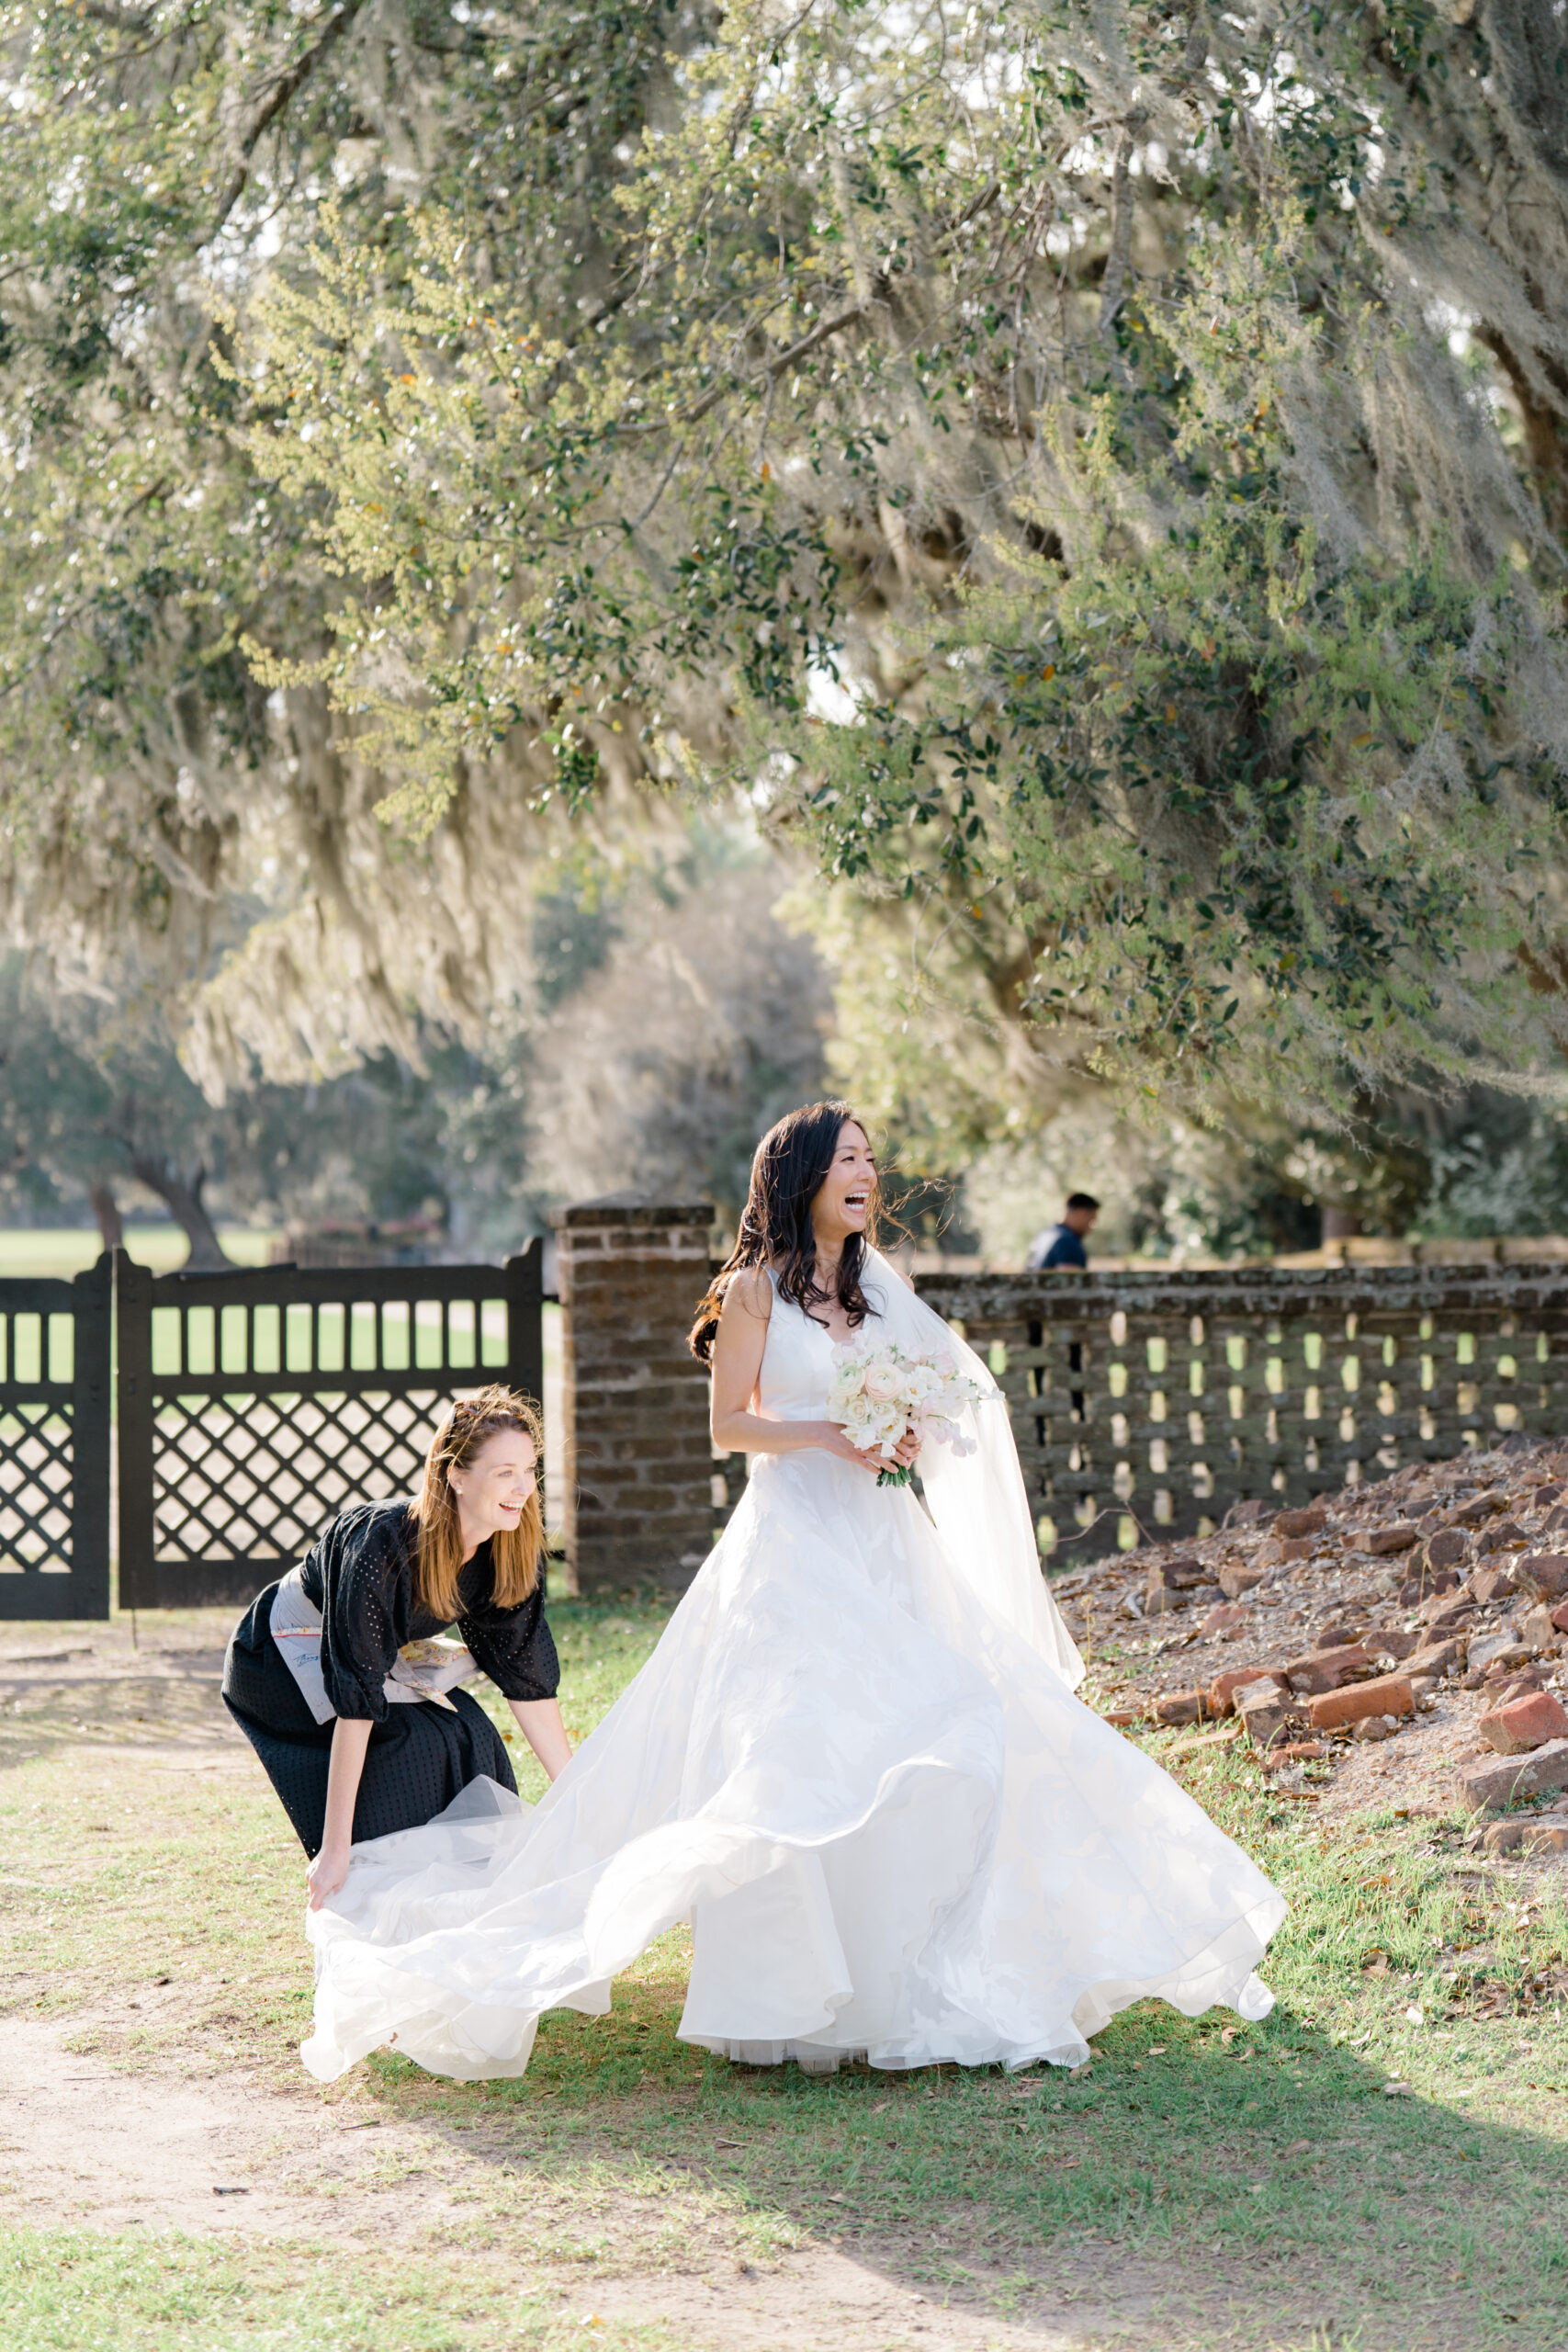 Bride arrives to wedding ceremony. Golden sunshine and spanish moss. Wedding photographer that catches all the in-between moments.